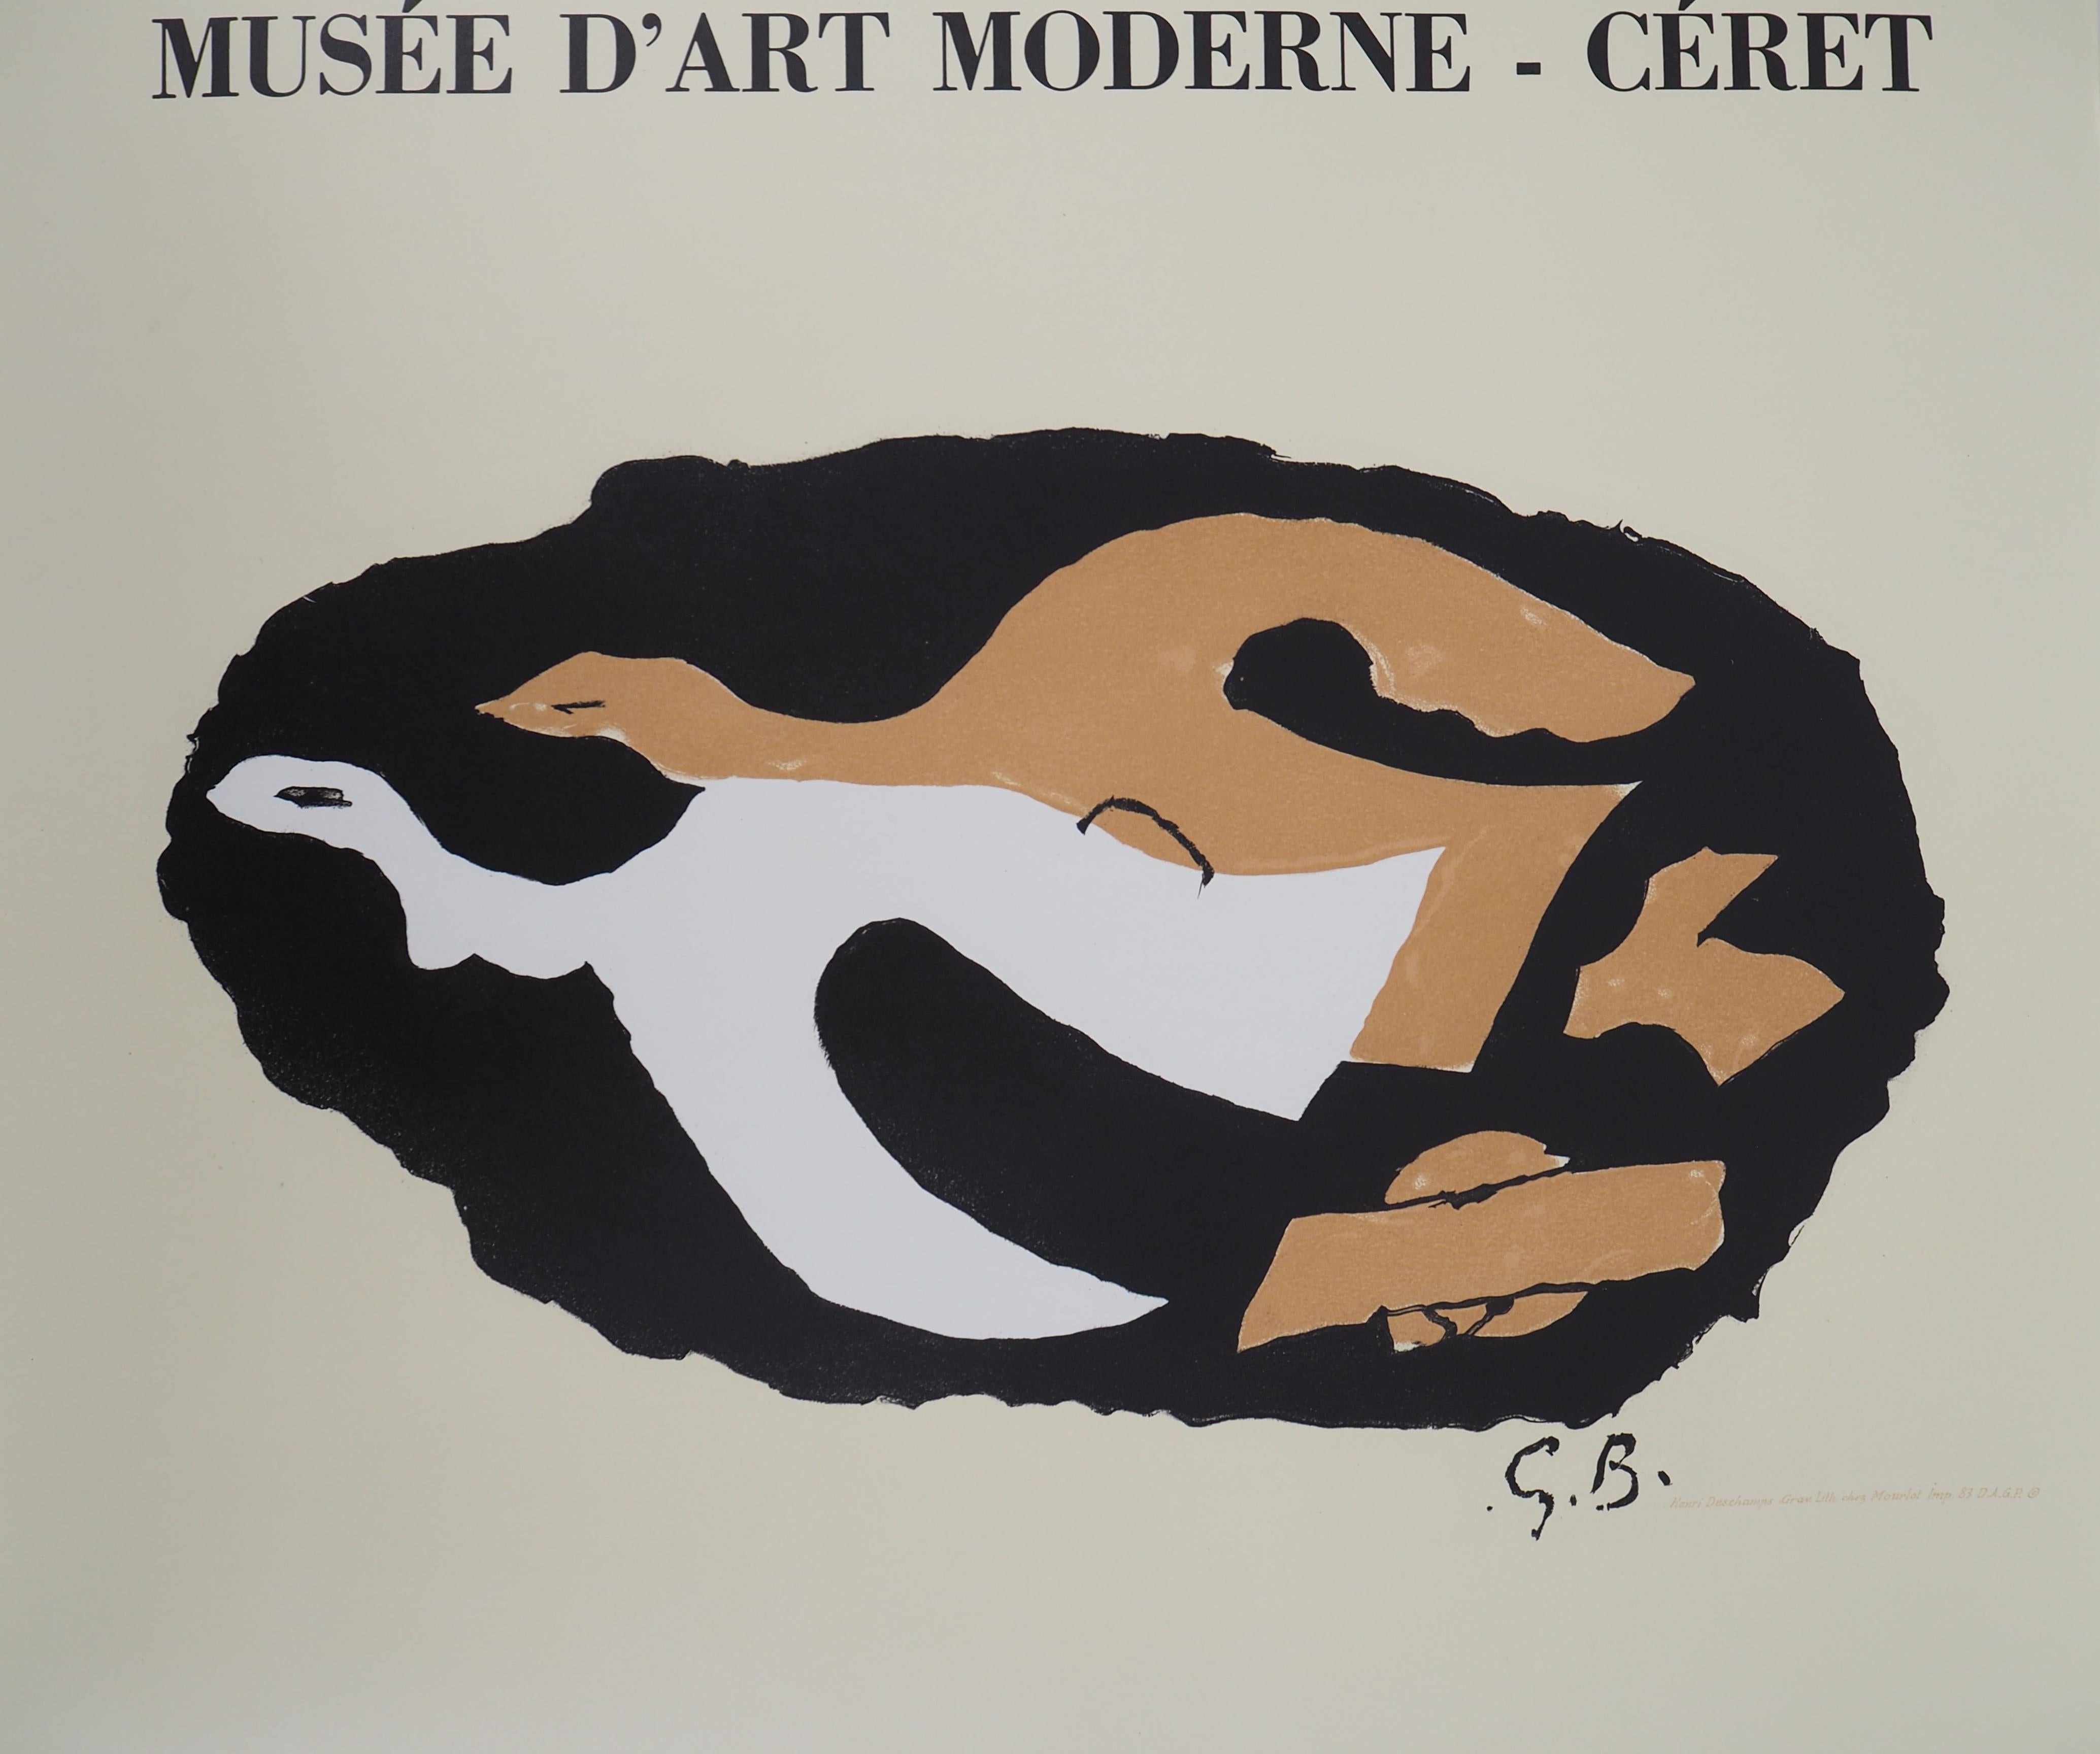 Two Birds Flying - Vintage lithograph exhibition poster # Mourlot - Print by (after) Georges Braque